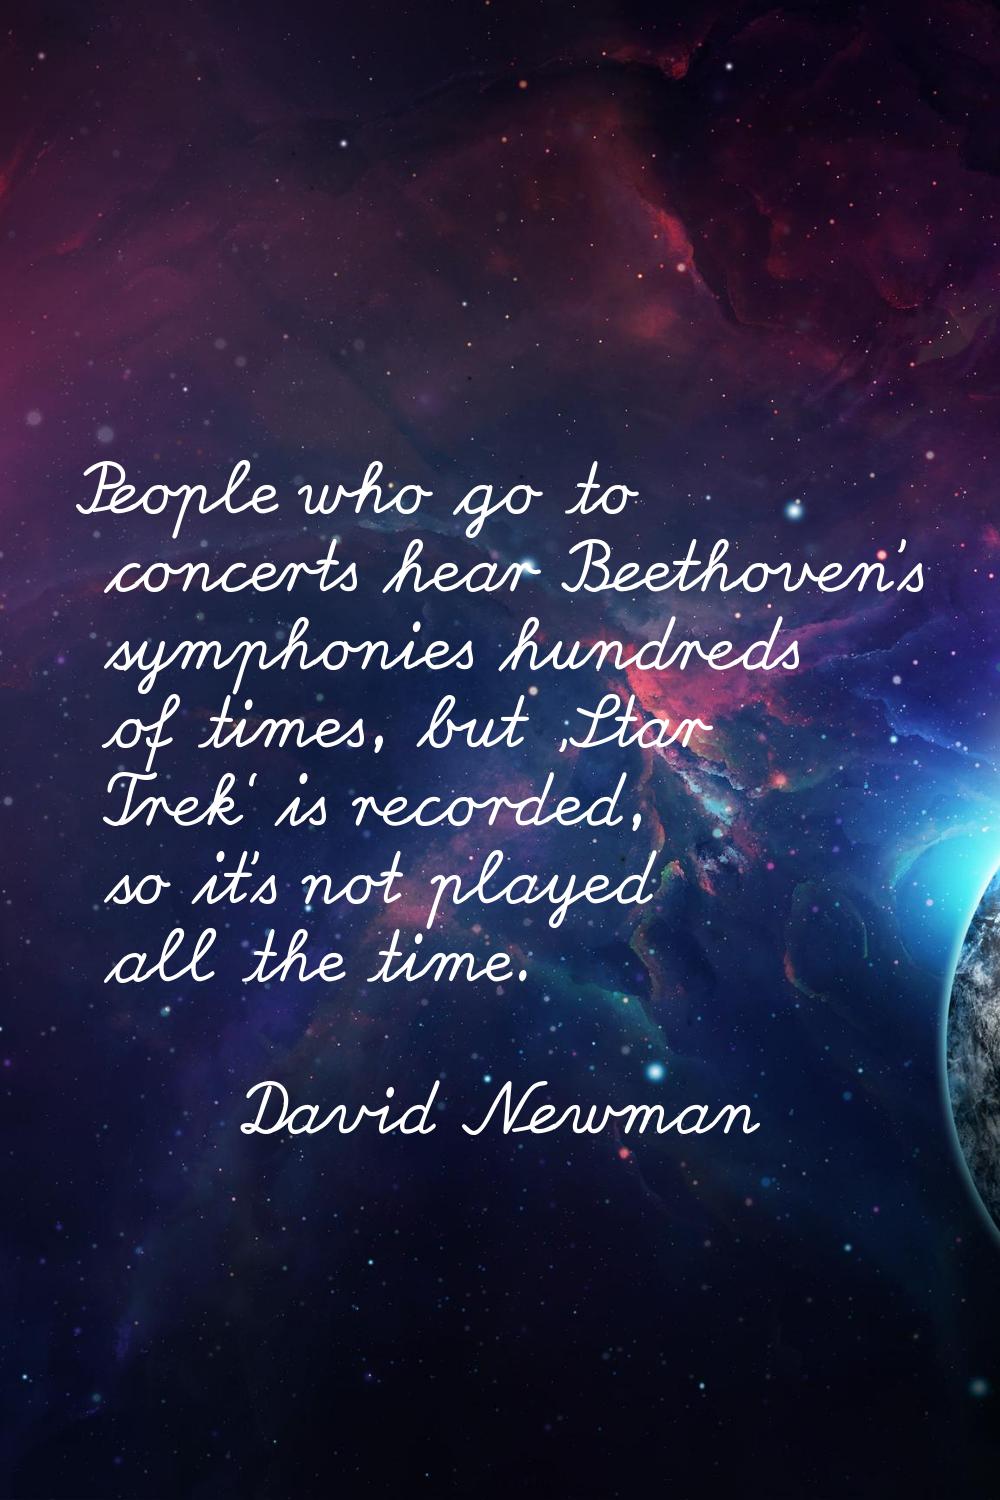 People who go to concerts hear Beethoven's symphonies hundreds of times, but 'Star Trek' is recorde